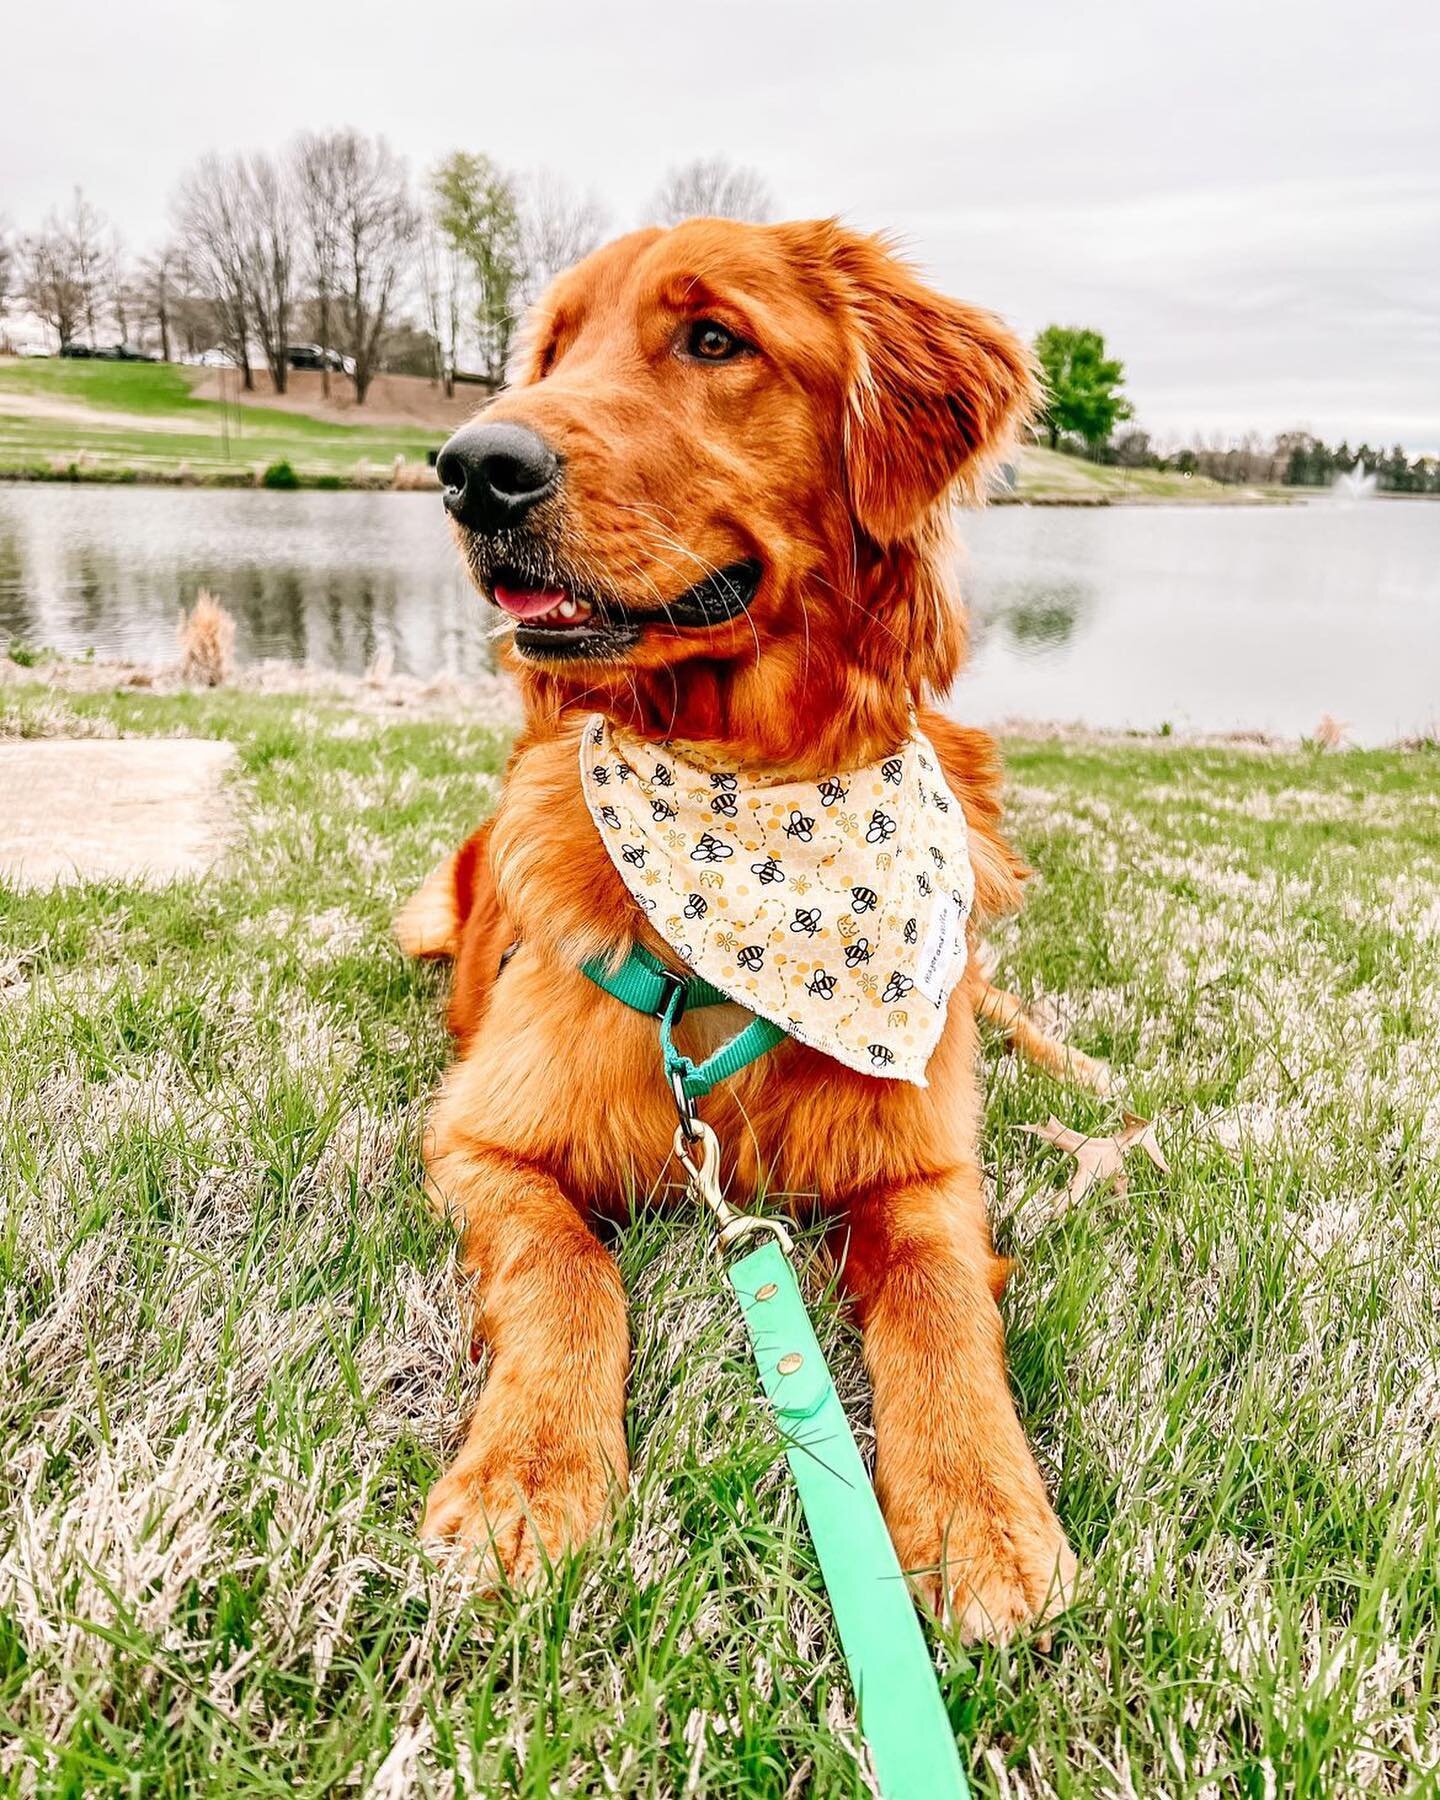 Bee positive 💛

Cash is wearing our Busy Bee bandana in a size Medium/Large tie on 🐝

#majorandmillie #shopsmall #smallbusiness #dogbandana #busybee #bee